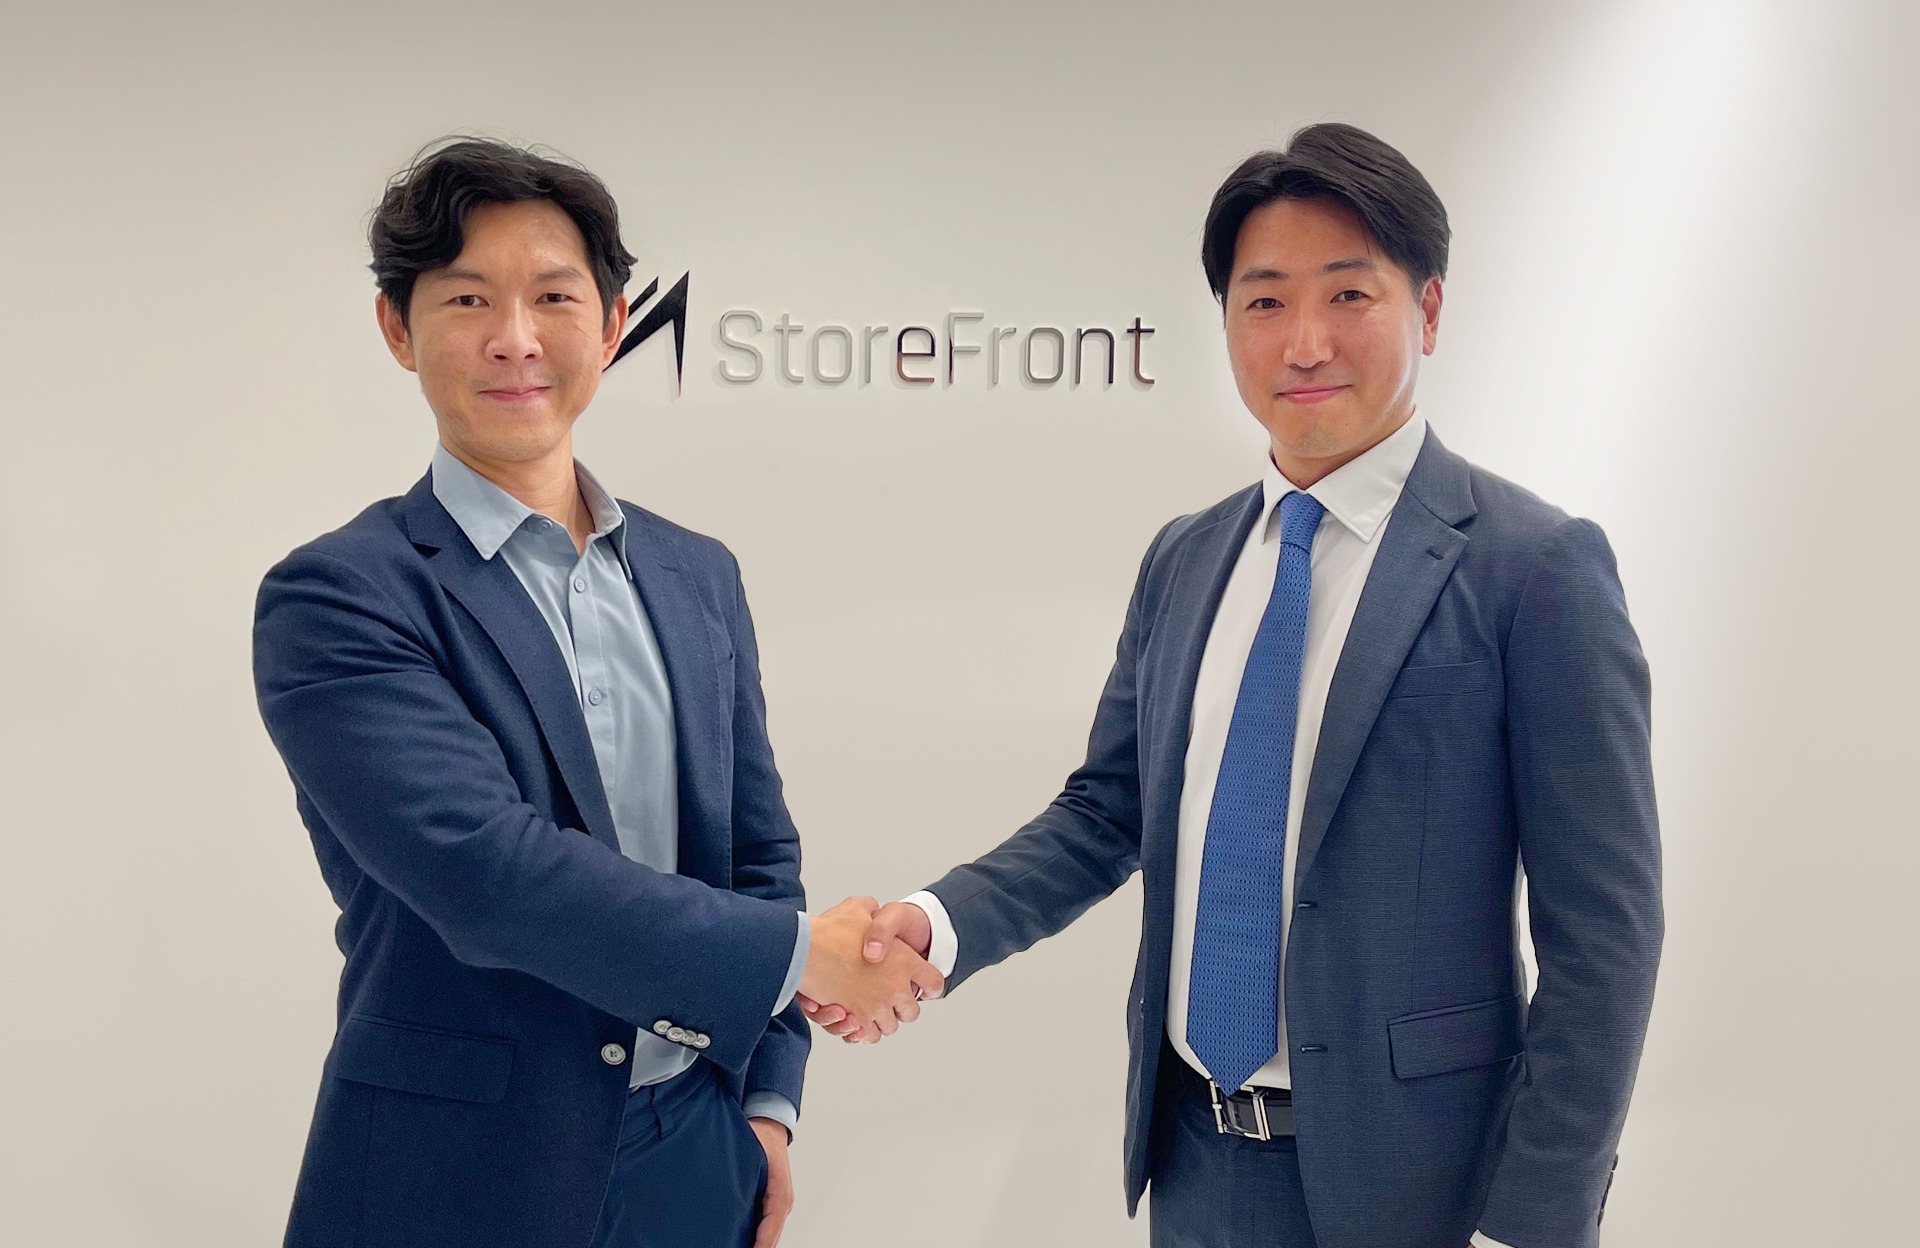 Gogolook Collaborates with StoreFront to Launch Anti-Fraud Services in Japan